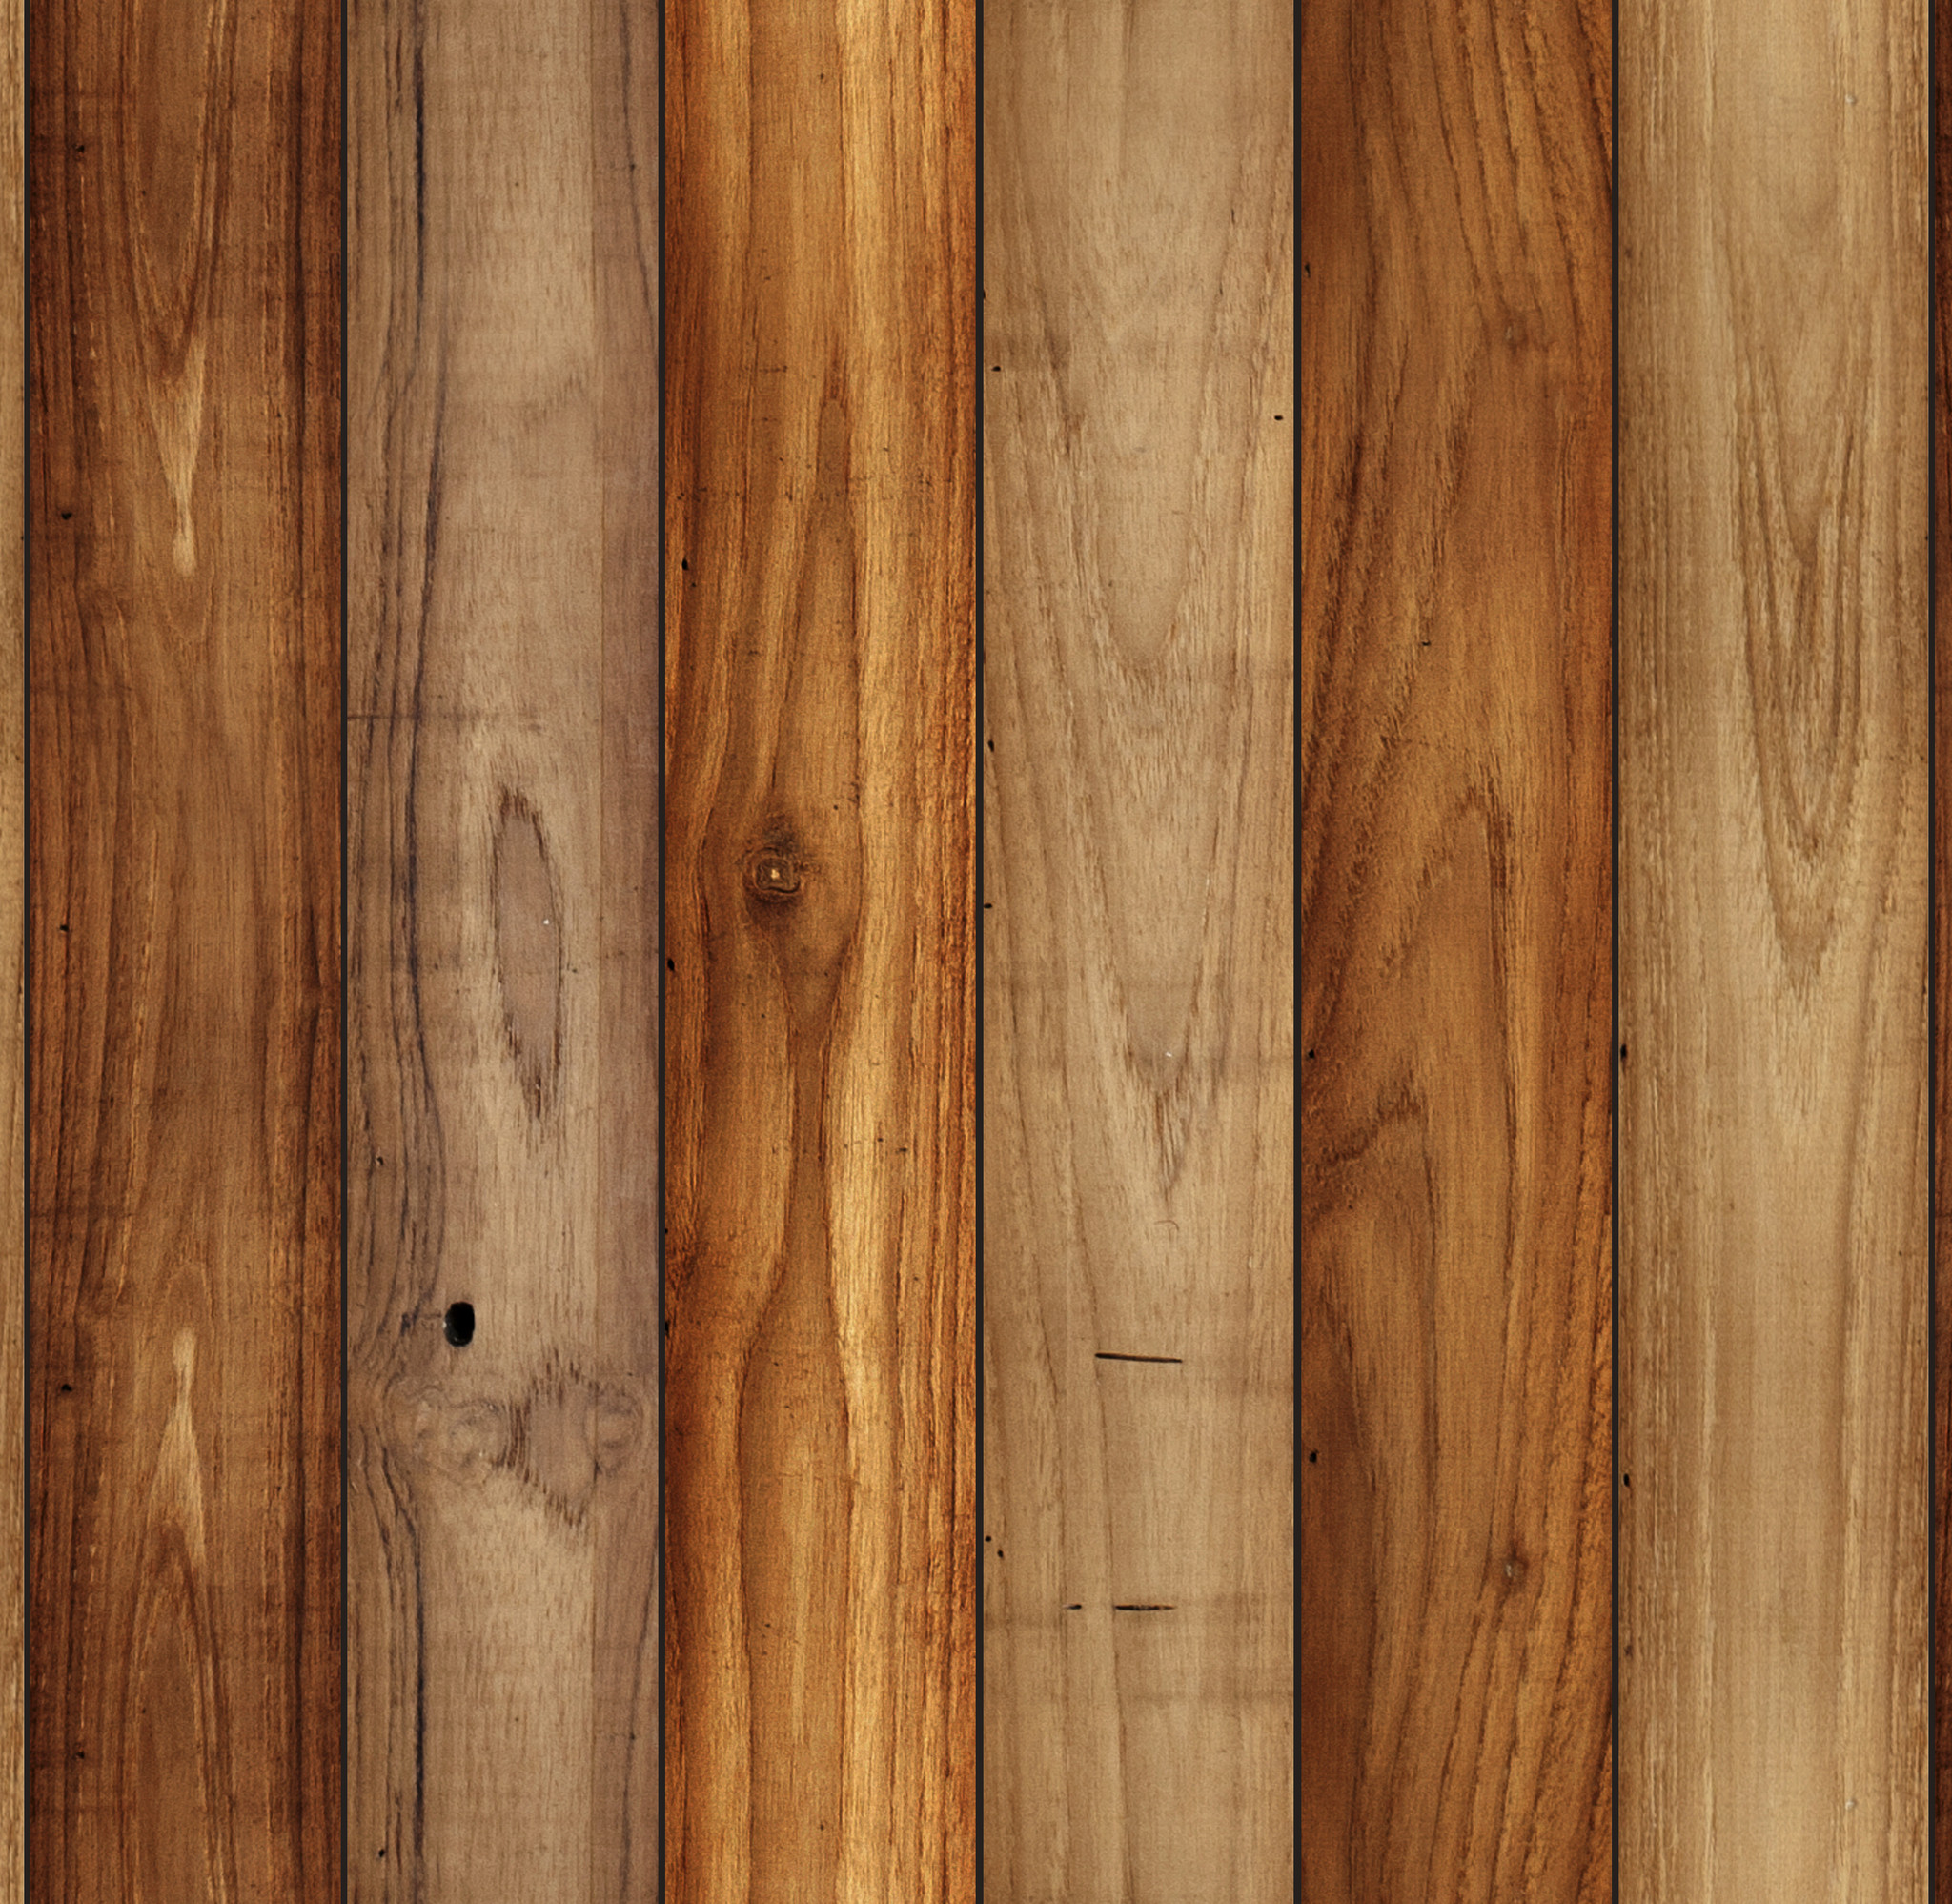 Removable Wallpaper - Panel Of Wood - HD Wallpaper 